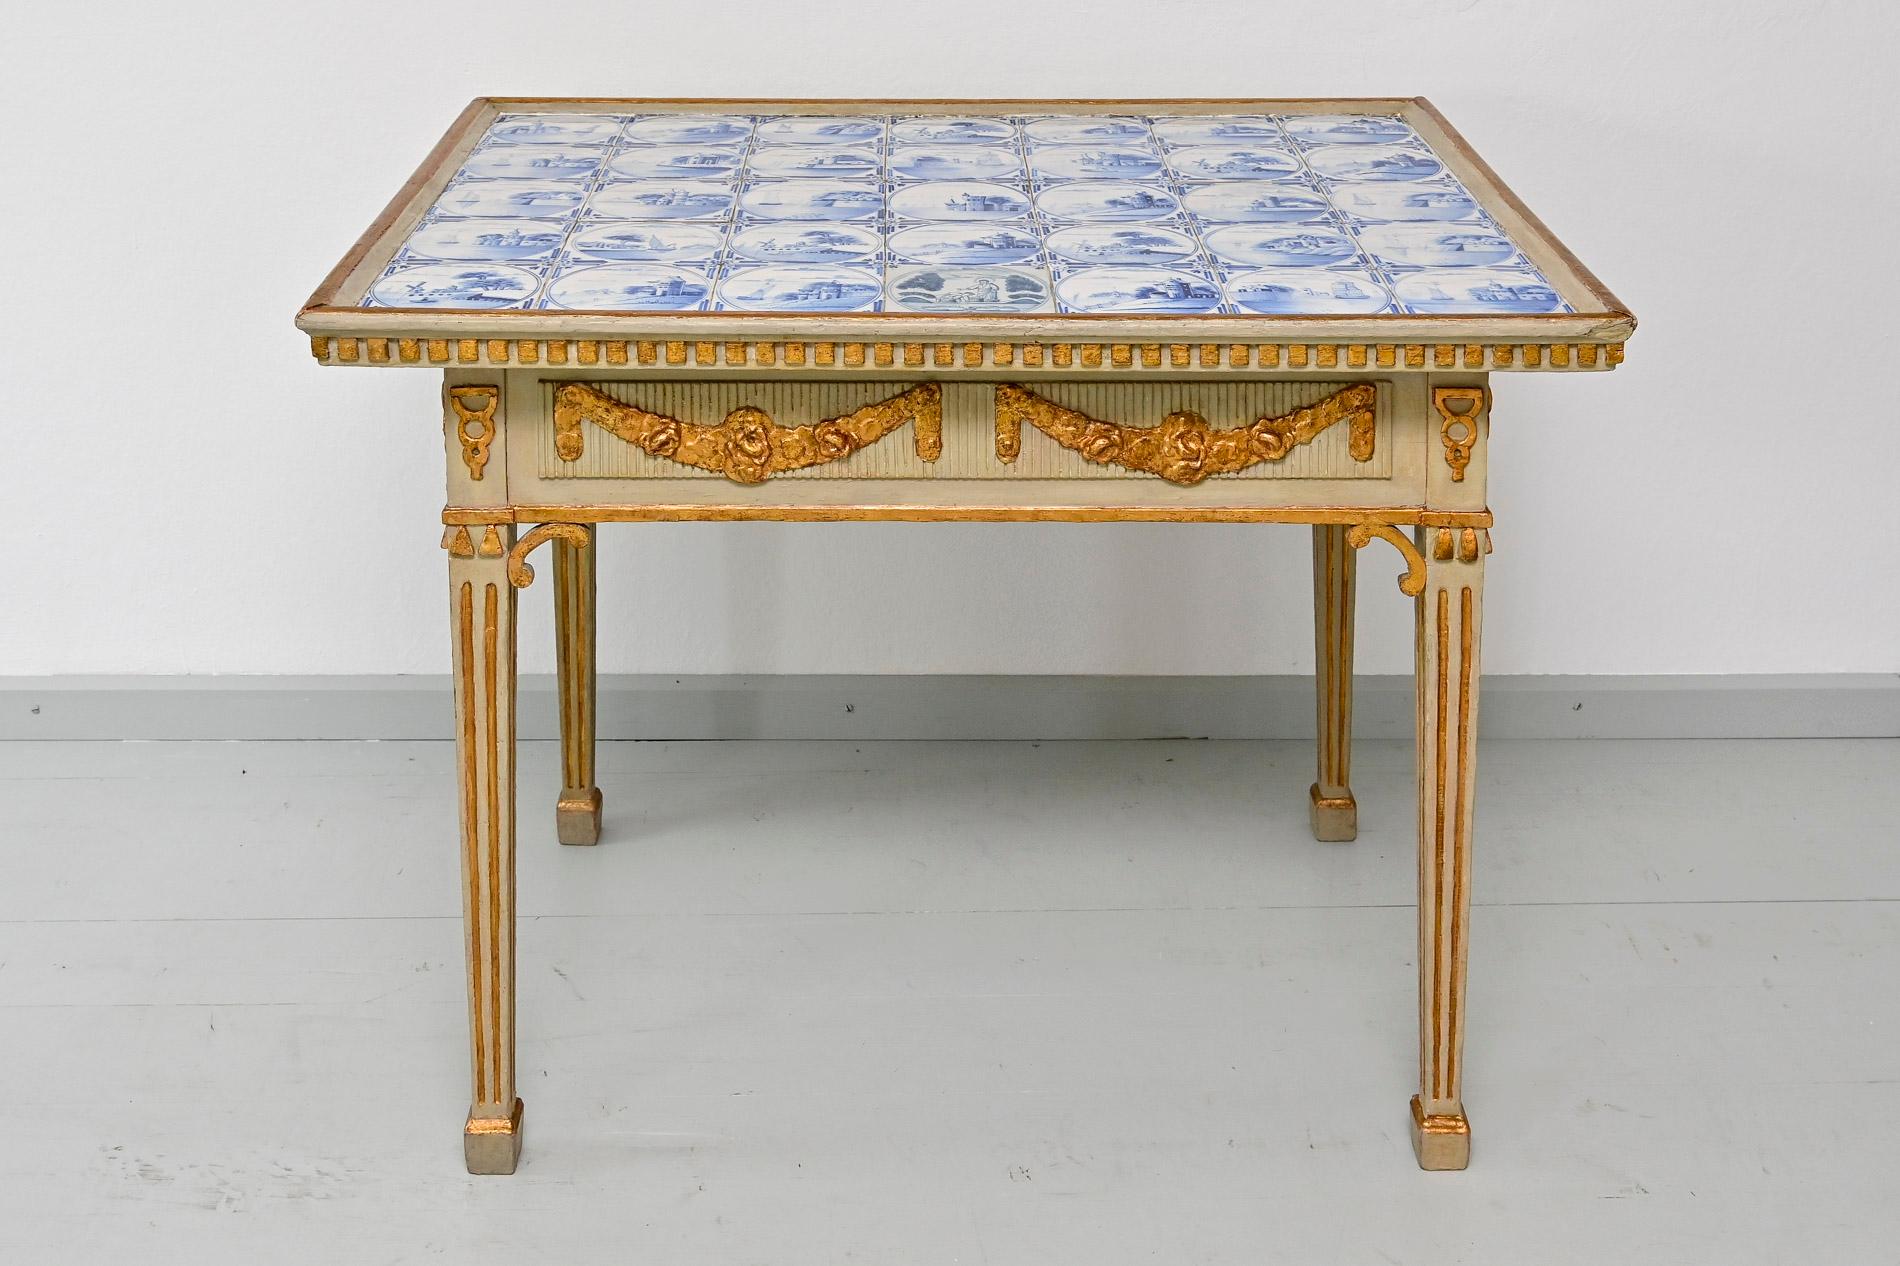 Late 18th Century 18th Century Table with Delft Tiles Schleswig Holstein Gray and Gilding For Sale